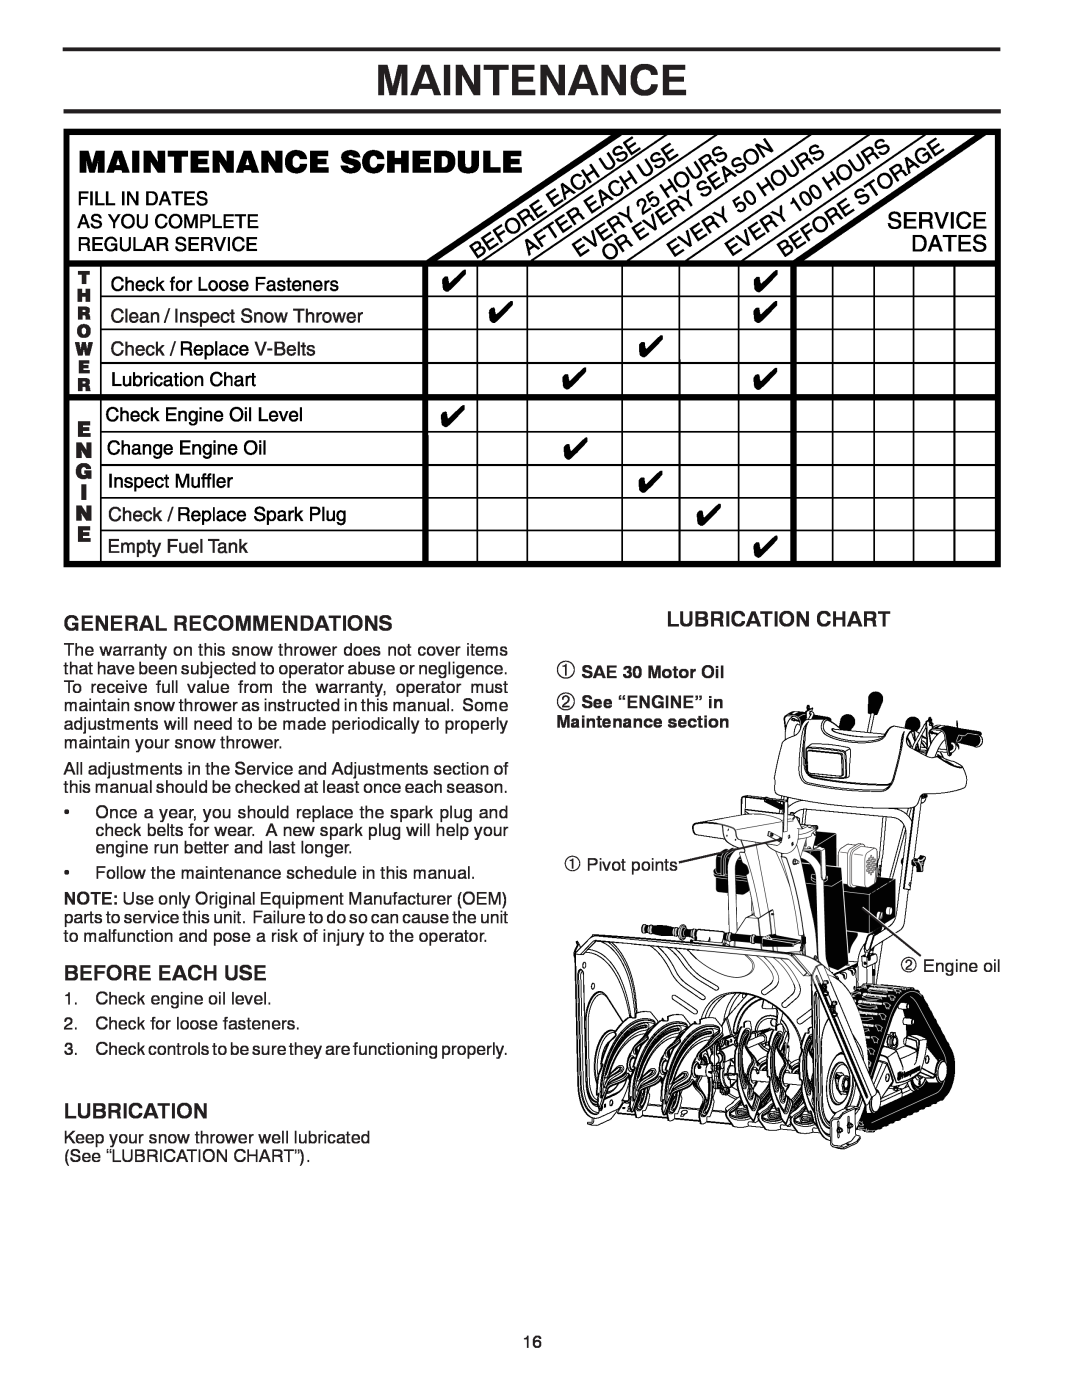 Husqvarna 1827EXLT warranty Maintenance, General Recommendations, Before Each Use, Lubrication Chart 